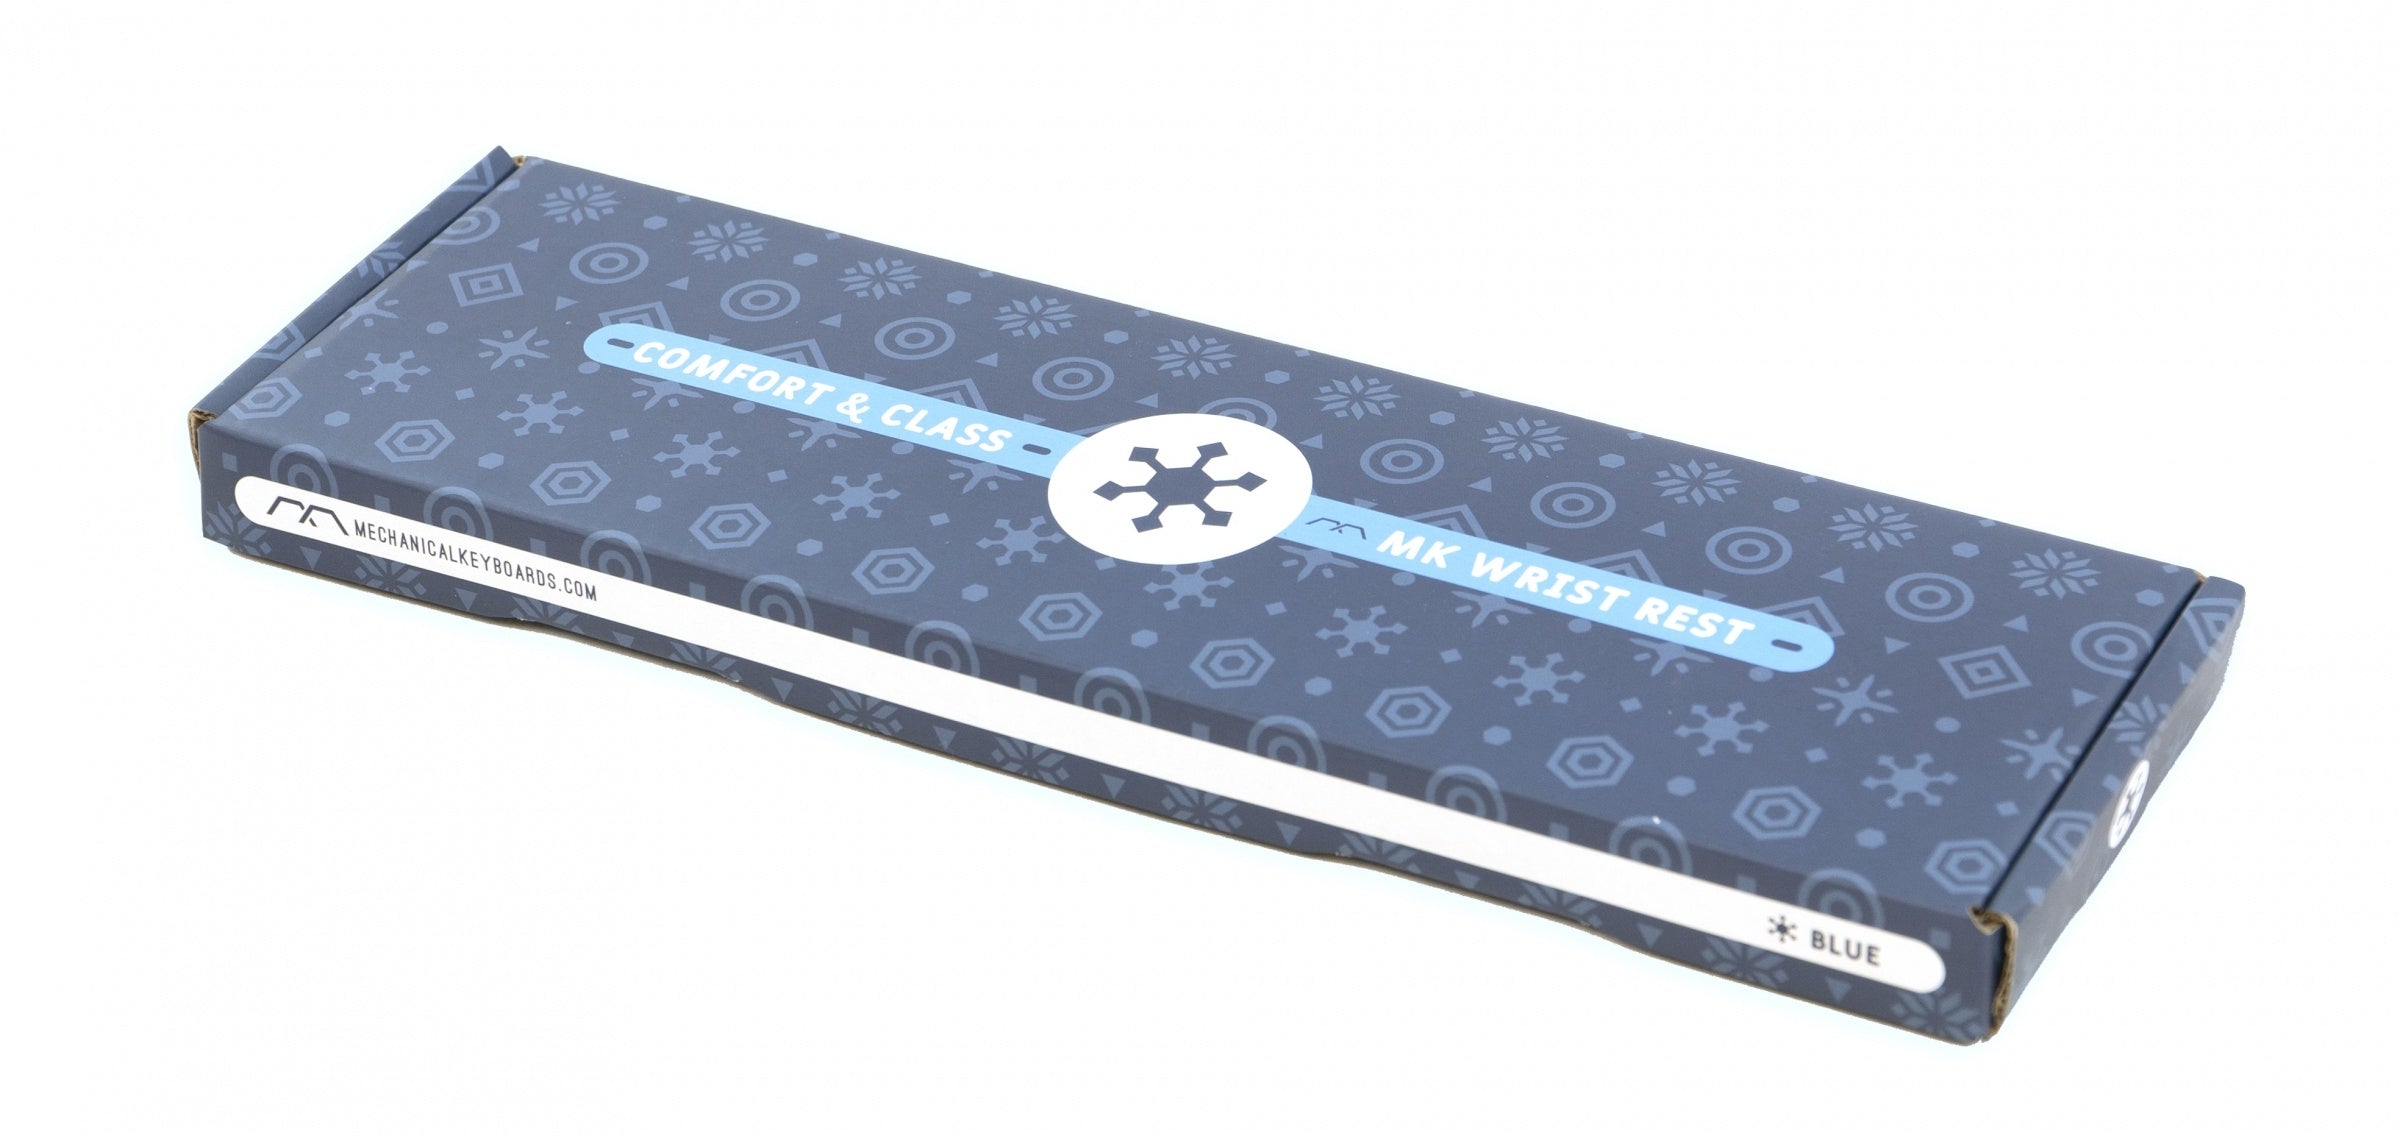 MK Snowflake Compact 60% Wrist Rest Blue Leather w/ White Stitching MKGQY8A29H |26955|